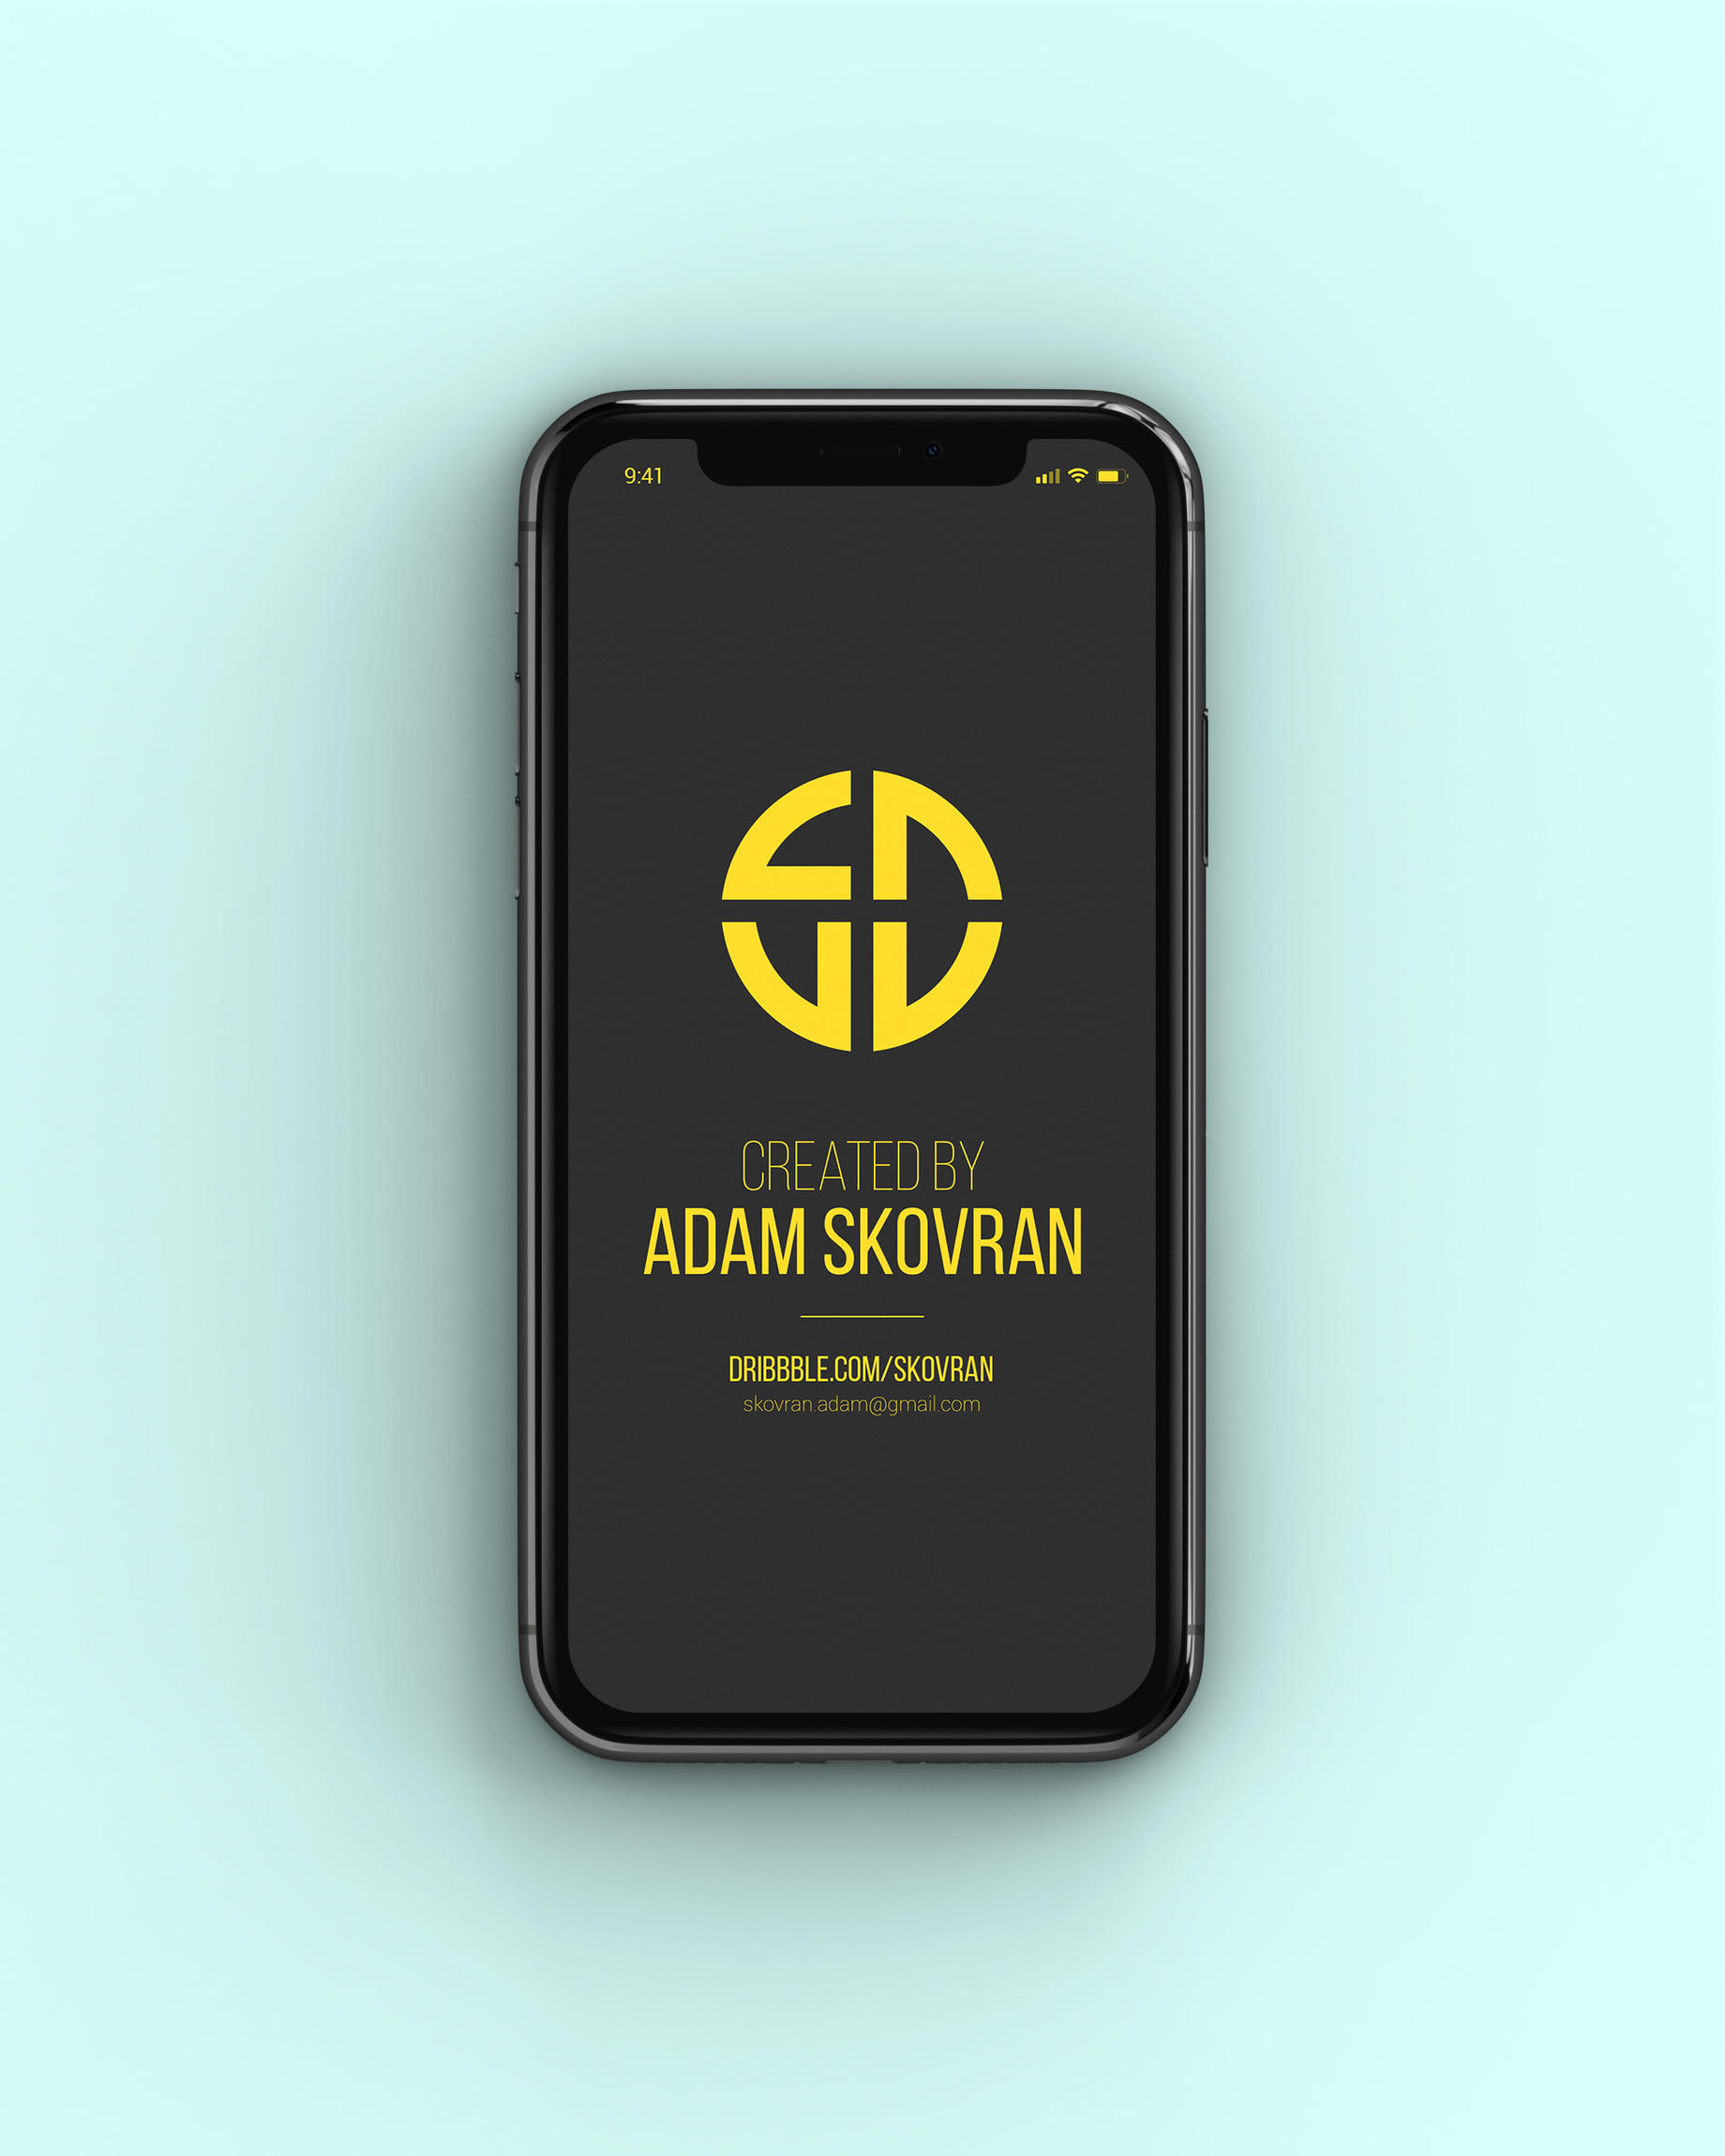 iPhone X mockups for UI - Projects - Blender Artists Community